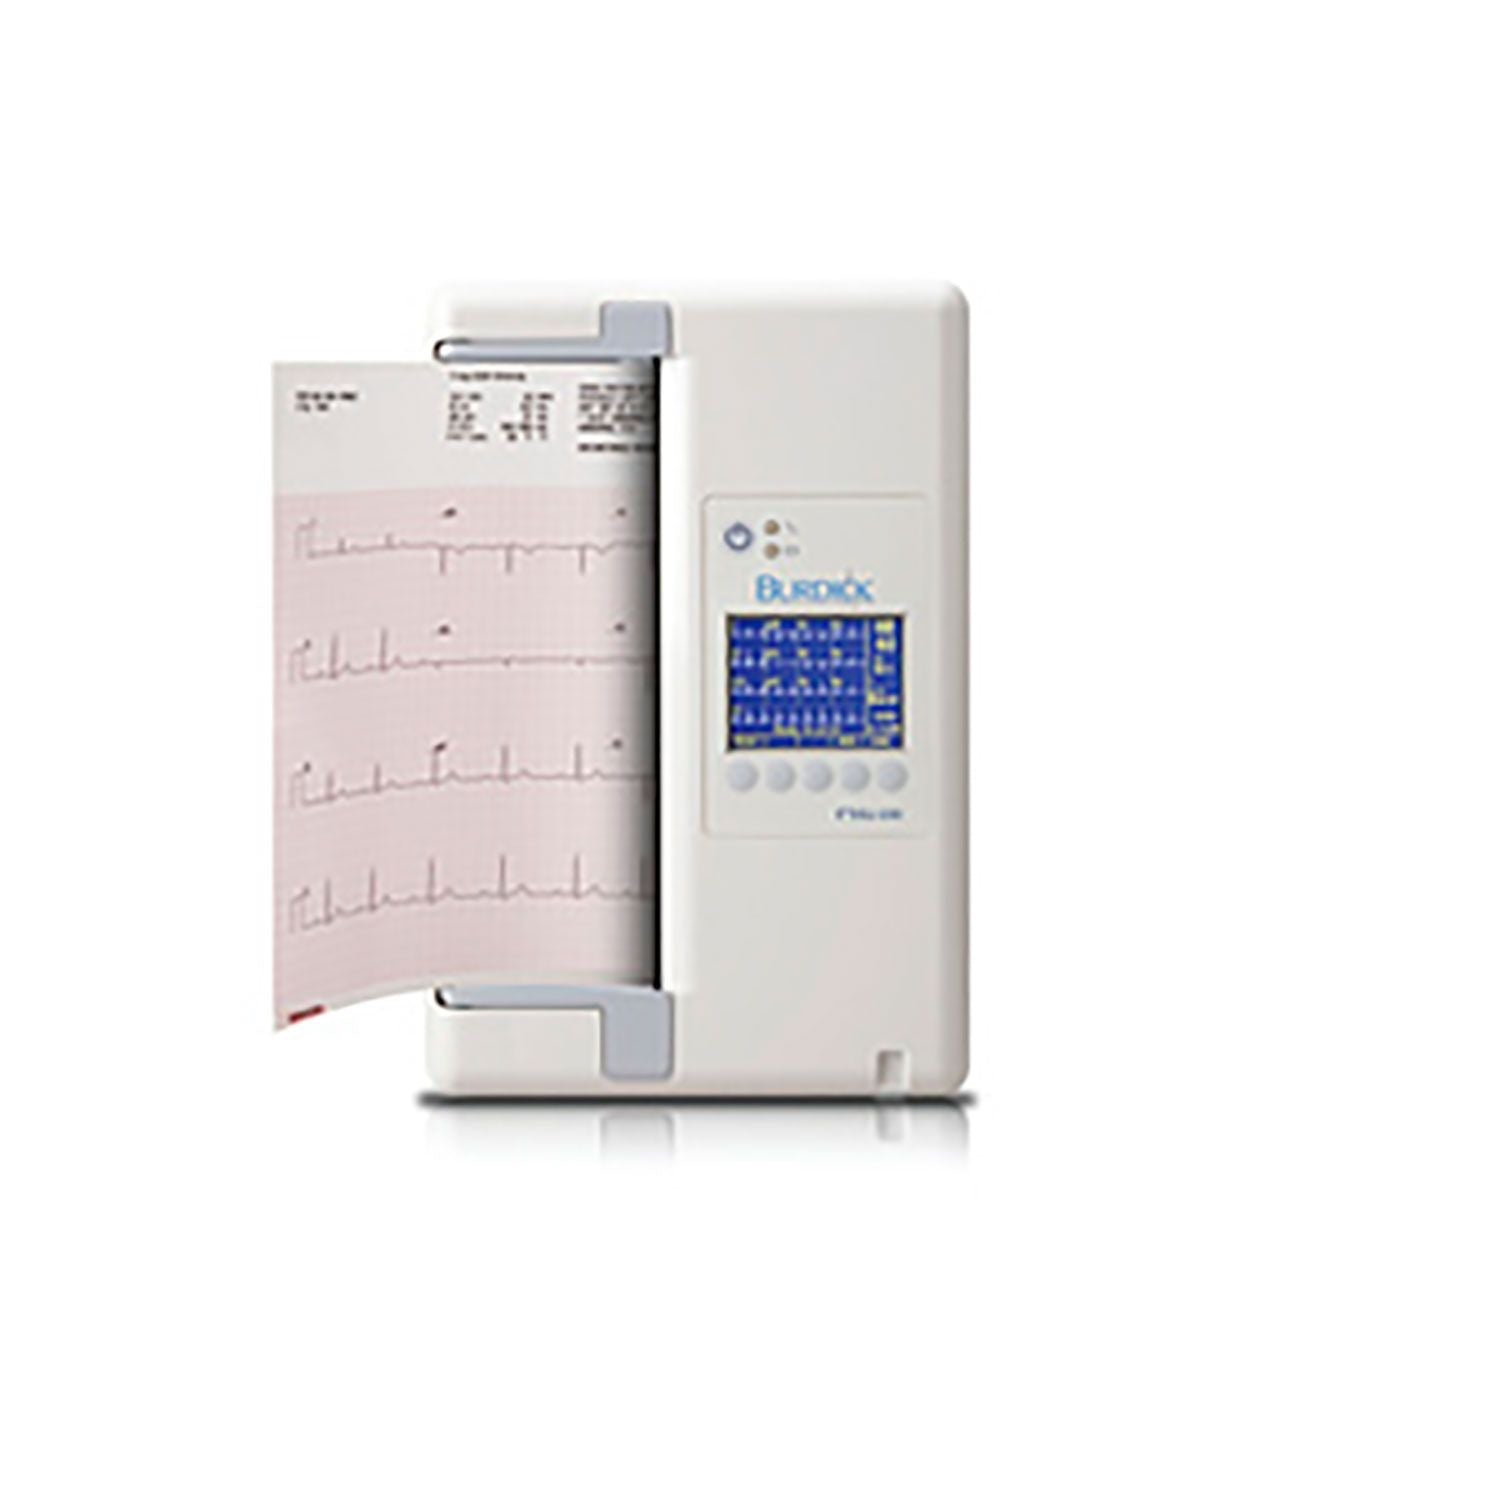 Welch Allyn/Mortara ELI230 ECG with wireless patient cable